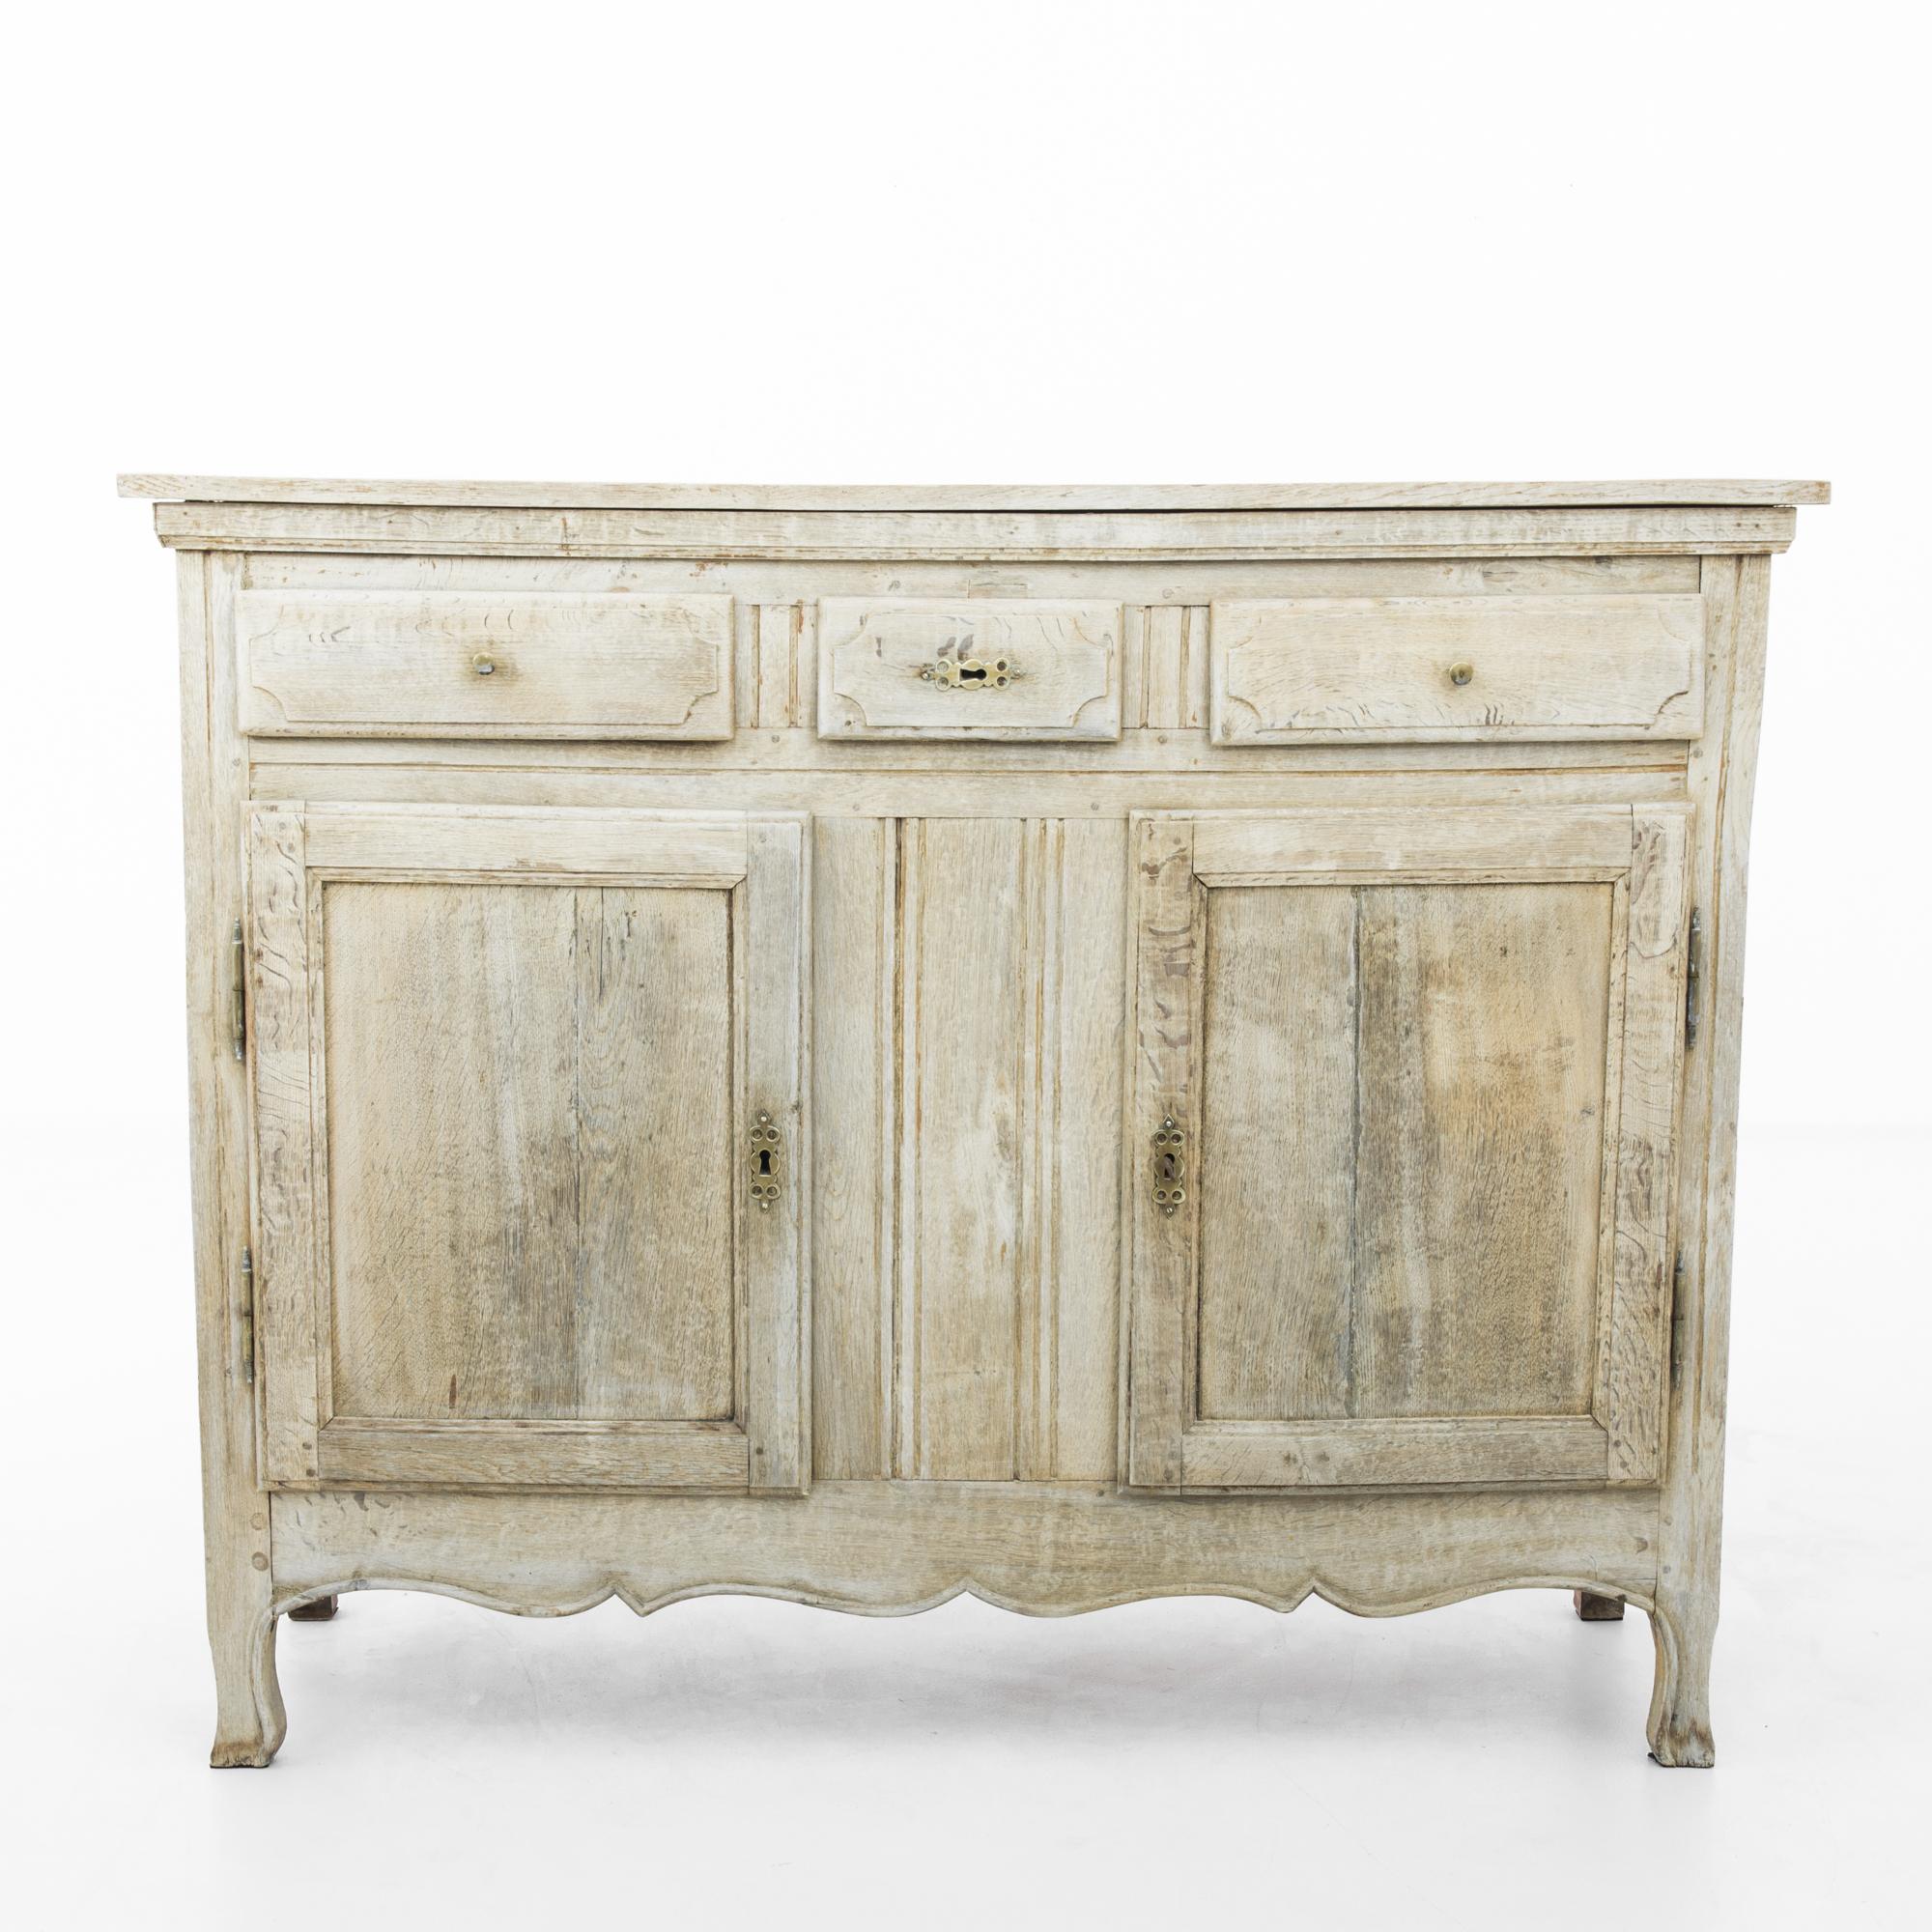 A two-door oak buffet from Belgium, circa 1850. The upright frame is subtly embellished by expressive raised panels on the cupboard doors and filigree hardware, time-worn patinated brass. Crafted in the age-old tradition of European artisans,